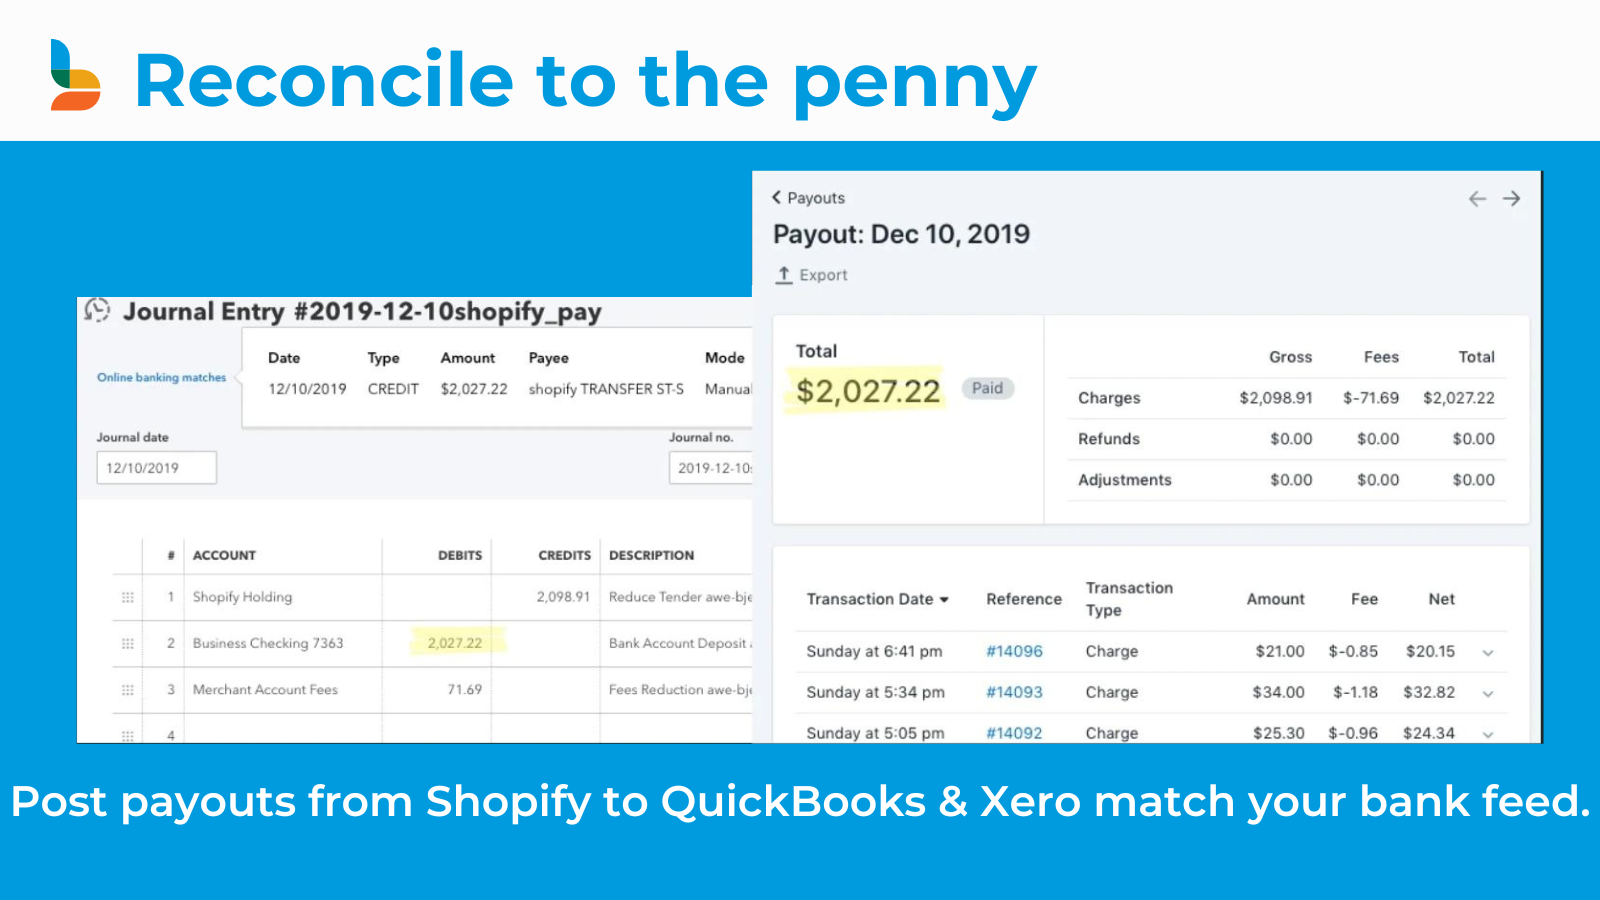 Post payouts from Shopify to QuickBooks & Xero match bank feed